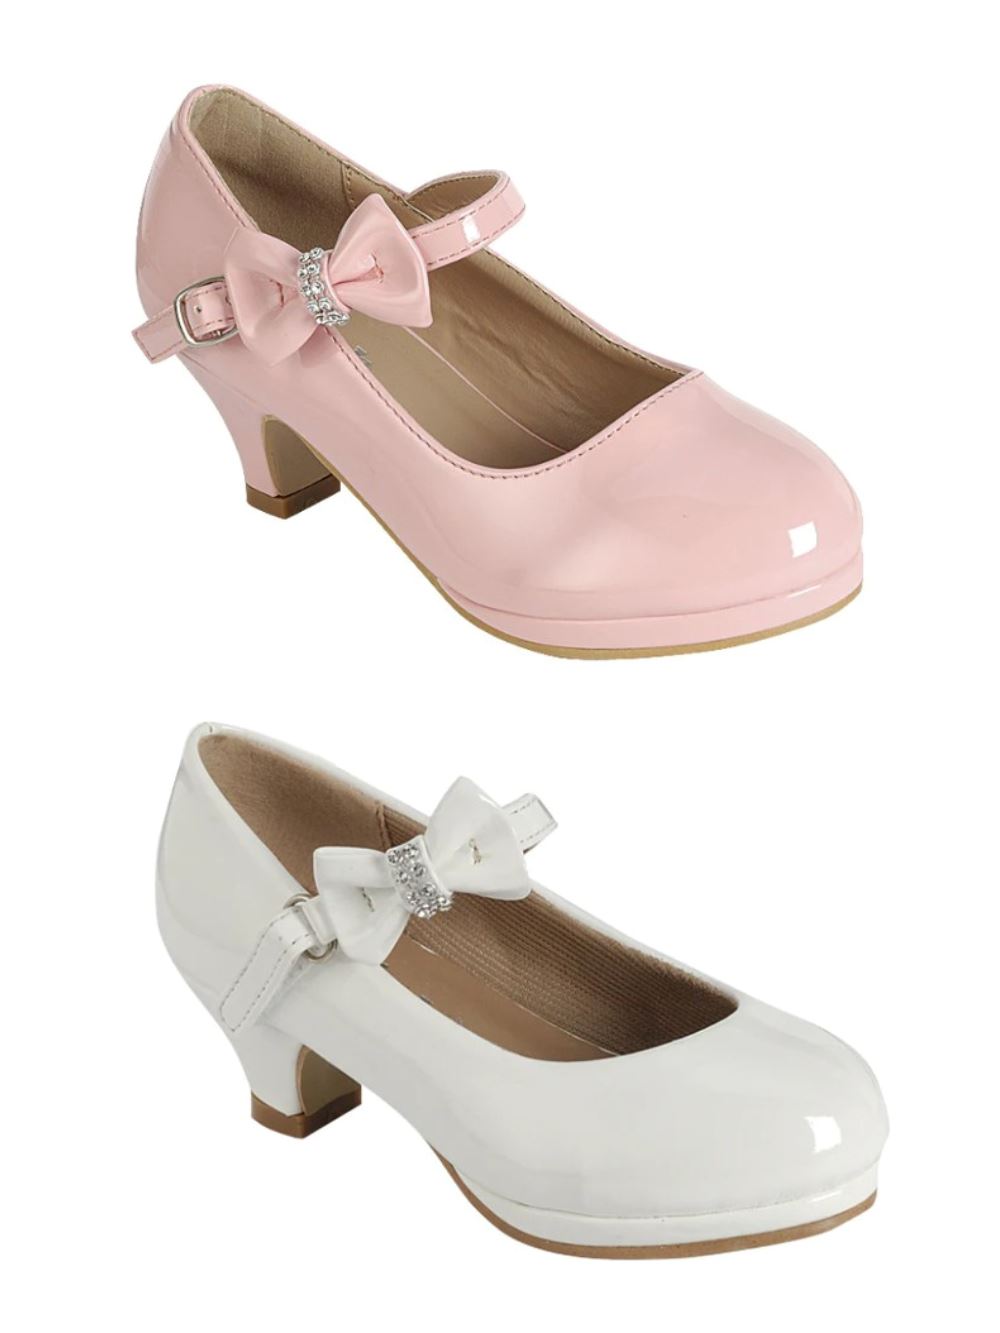 Mary Jane Low Heel Bow Adjustable Strap Girls Dress Shoes